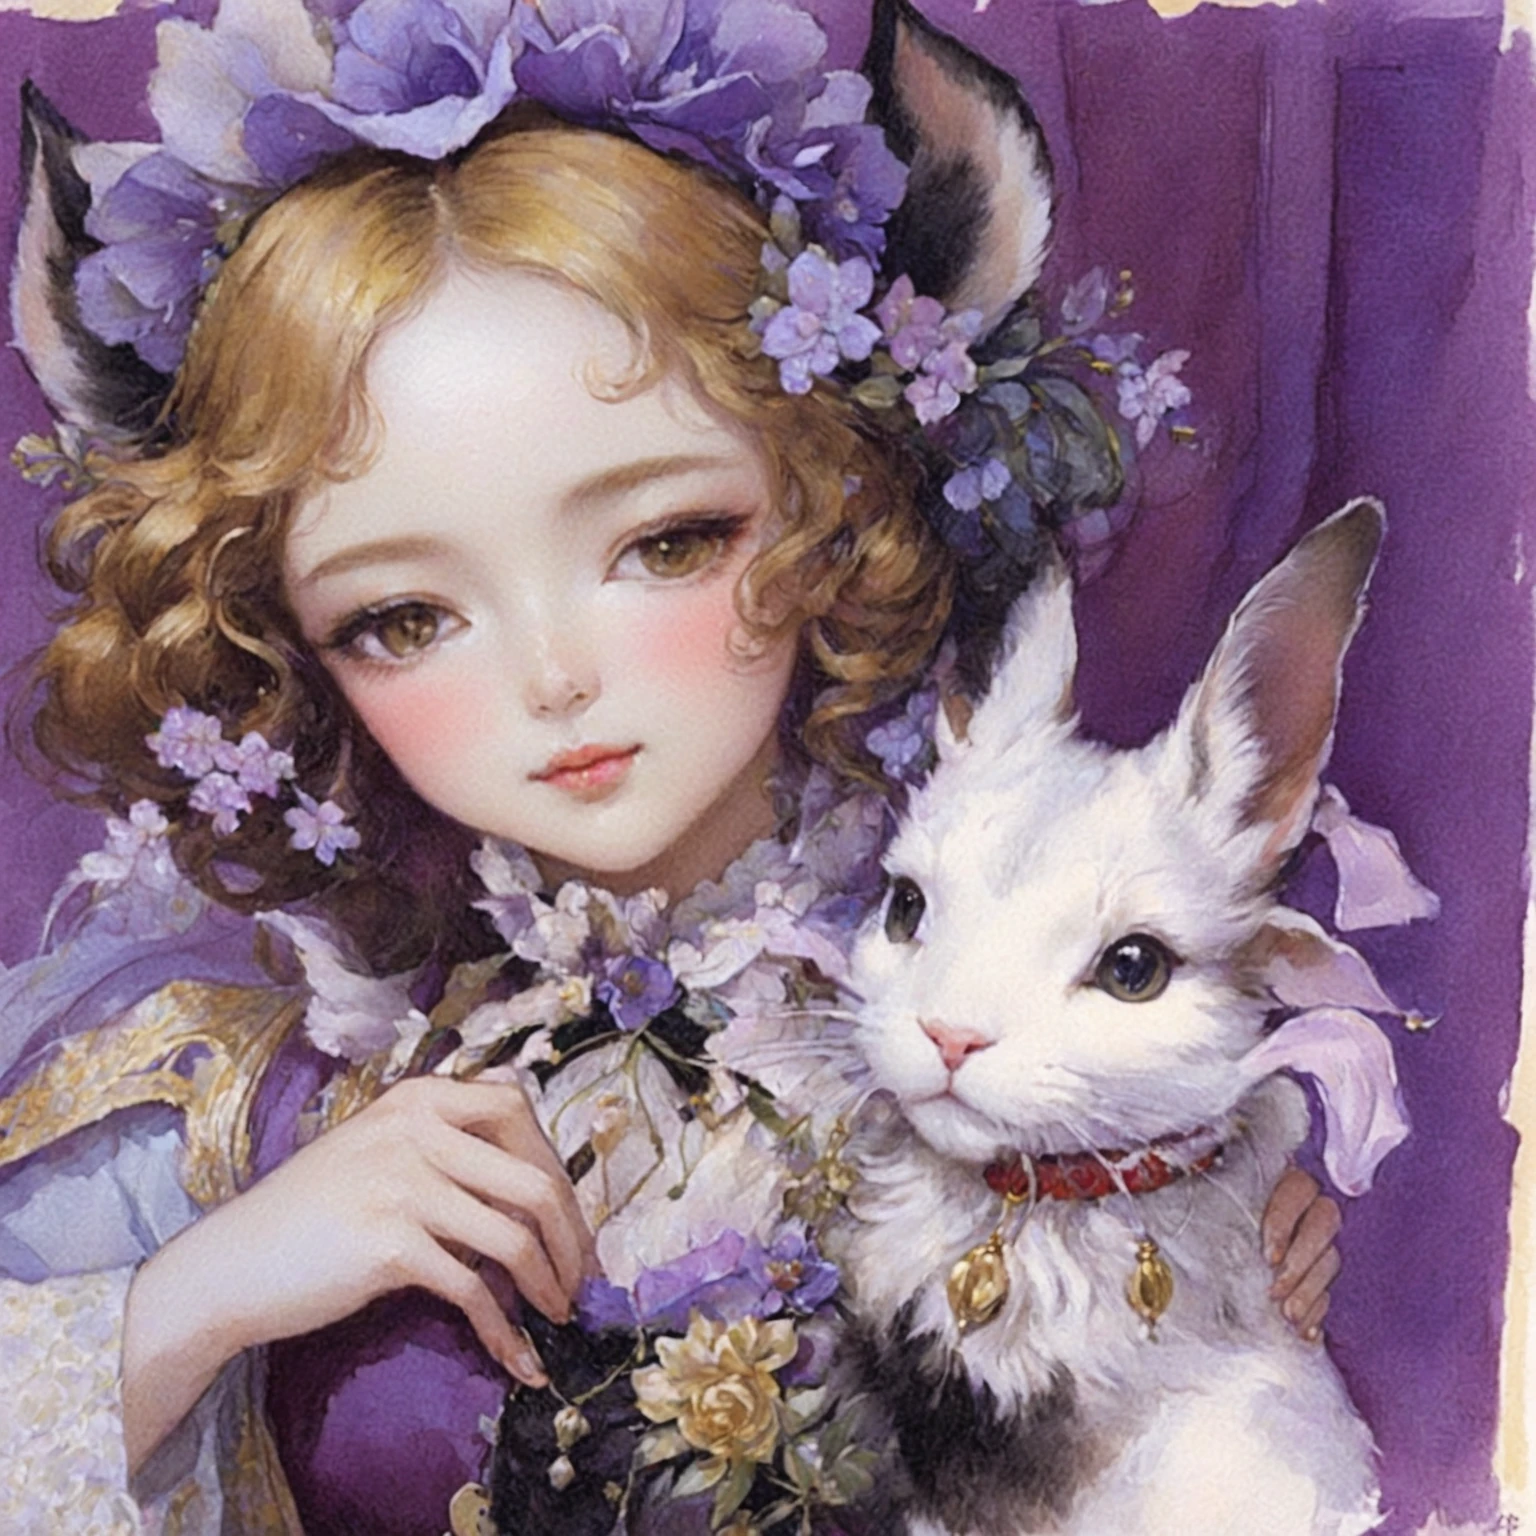 painting of a girl with a cat and flowers in her hair, jinyoung shin art, wlop and sakimichan, by Ni Duan, by Yang J, by Chen Lin, by Yamagata Hiro, bunny girl, by Ni Tian, by Ye Xin, guweiz, by Kinuko Y. Craft